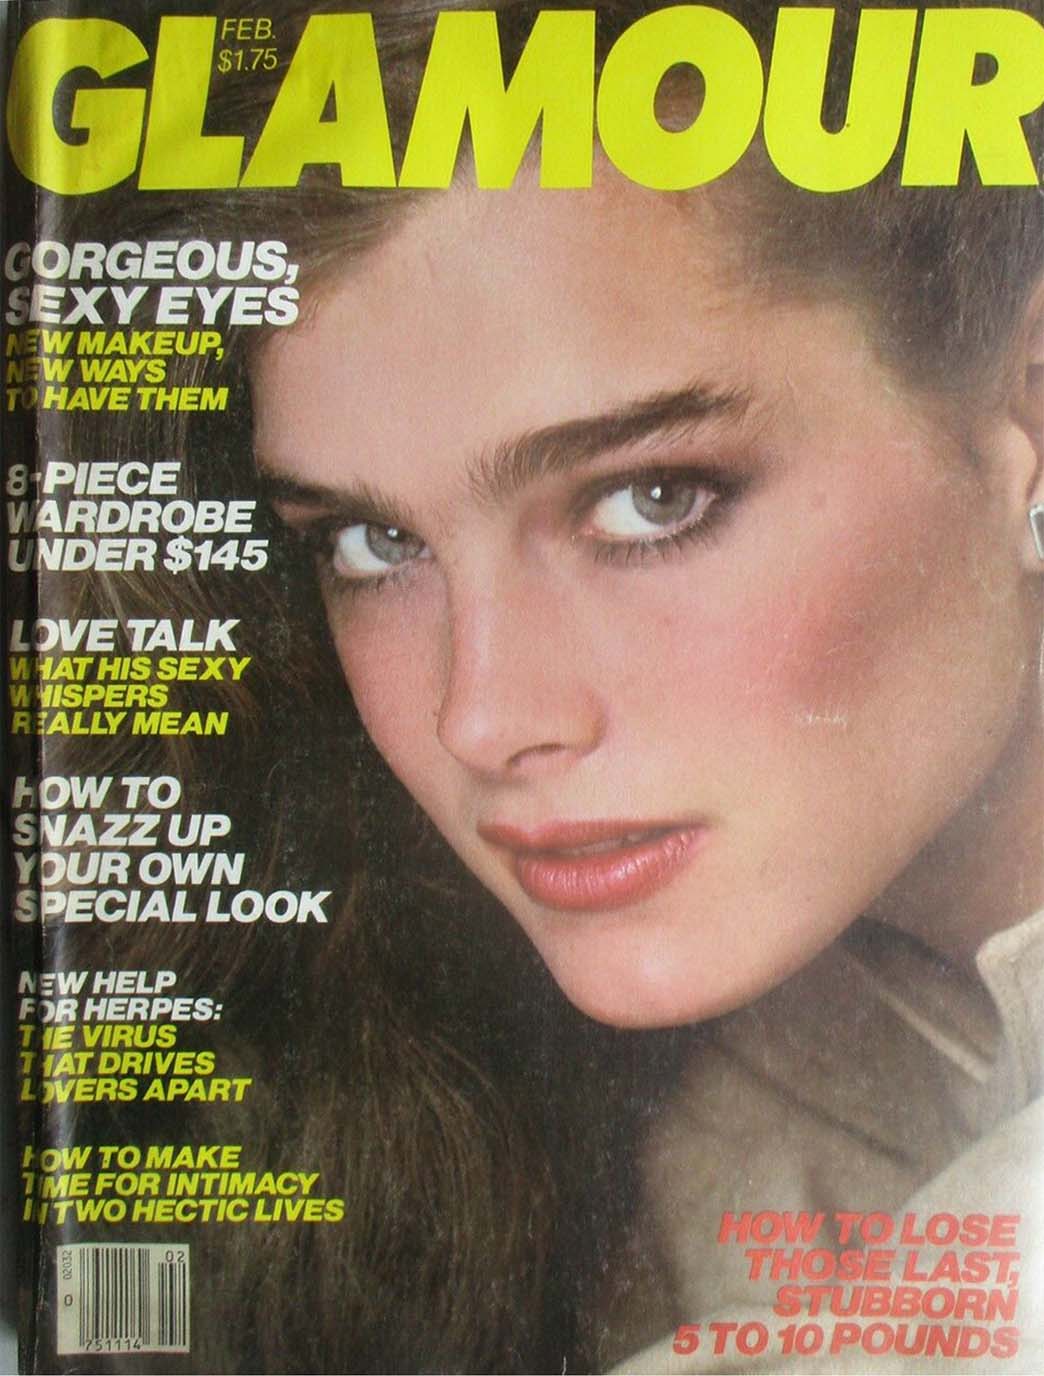 Glamour February 1981 magazine back issue Glamour magizine back copy Glamour February 1981 Womens Magazine Back Issue Published by Conde Nast Publications. Gorgeous, Sexy Eyes New Makeup, New Ways To Have Them.